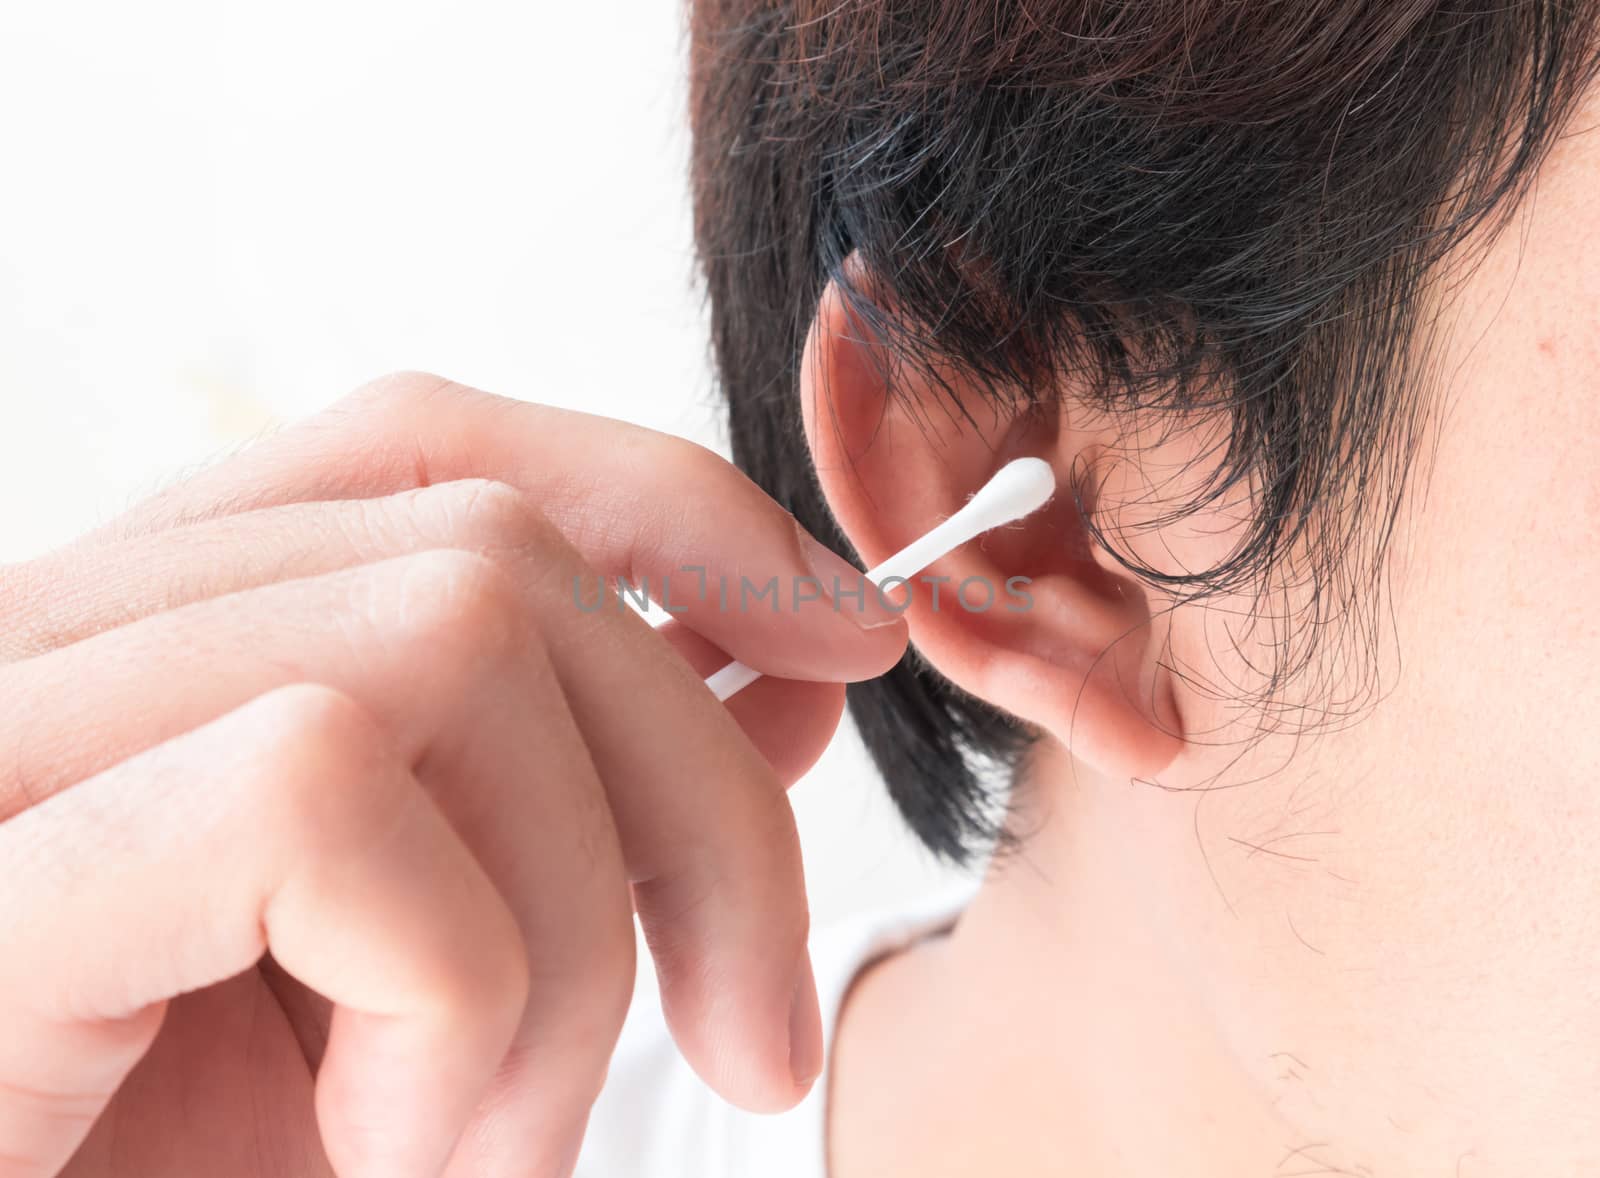 Closeup man cleaning ear with cotton bud, health care concept by pt.pongsak@gmail.com